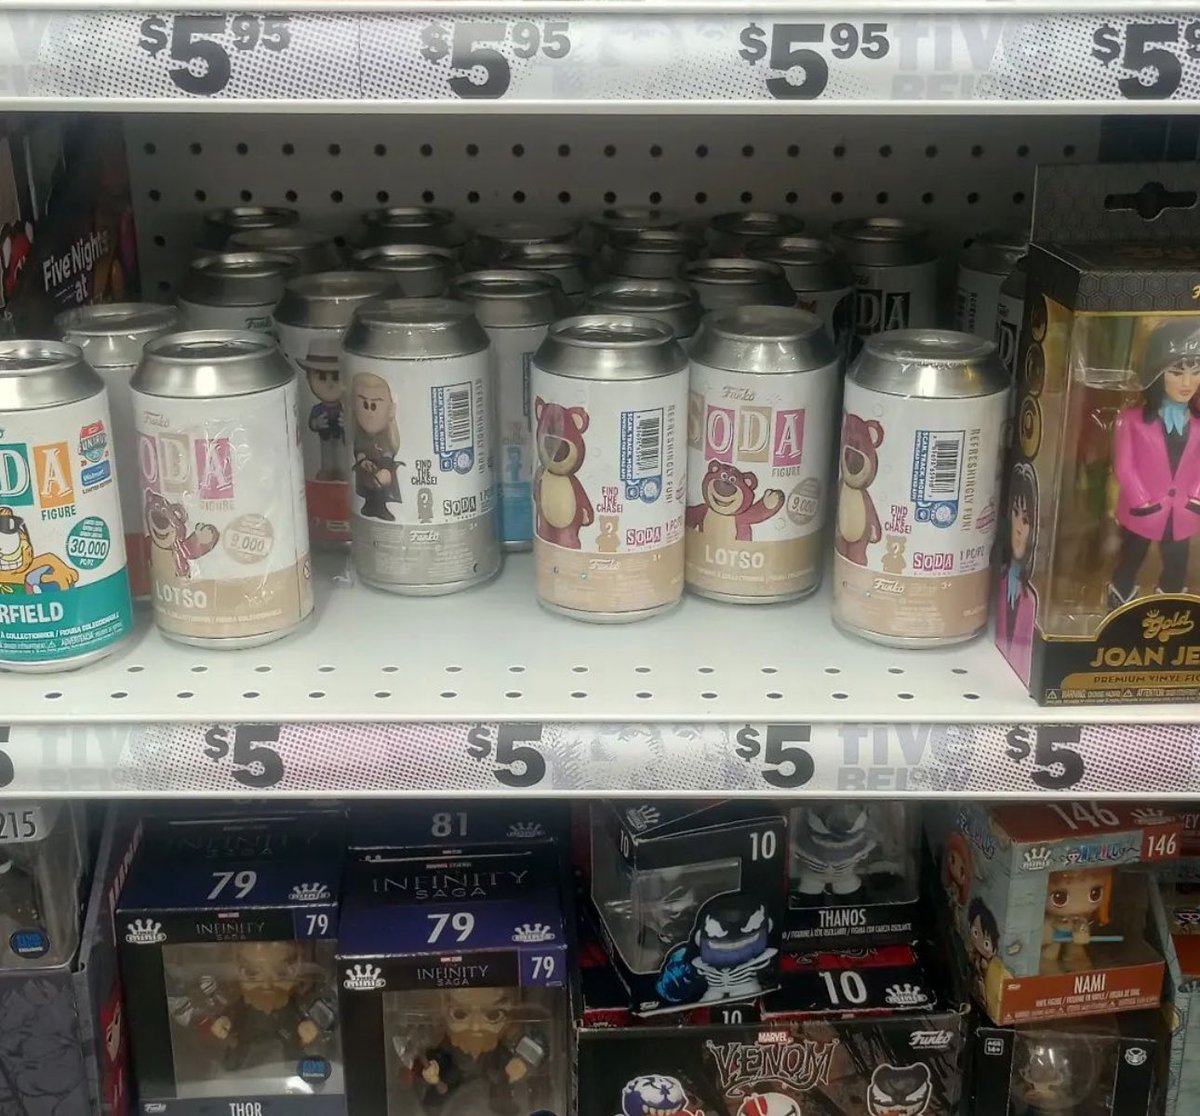 More Funko Sodas are hitting Five Below stores, including the Fun on the Run Garfield!
.
Credit @luciengorgon 
#Funko #FunkoPop #FunkoPopVinyl #Pop #PopVinyl #Collectibles #Collectible #FunkoCollector #FunkoPops #Collector #Toy #Toys #DisTrackers